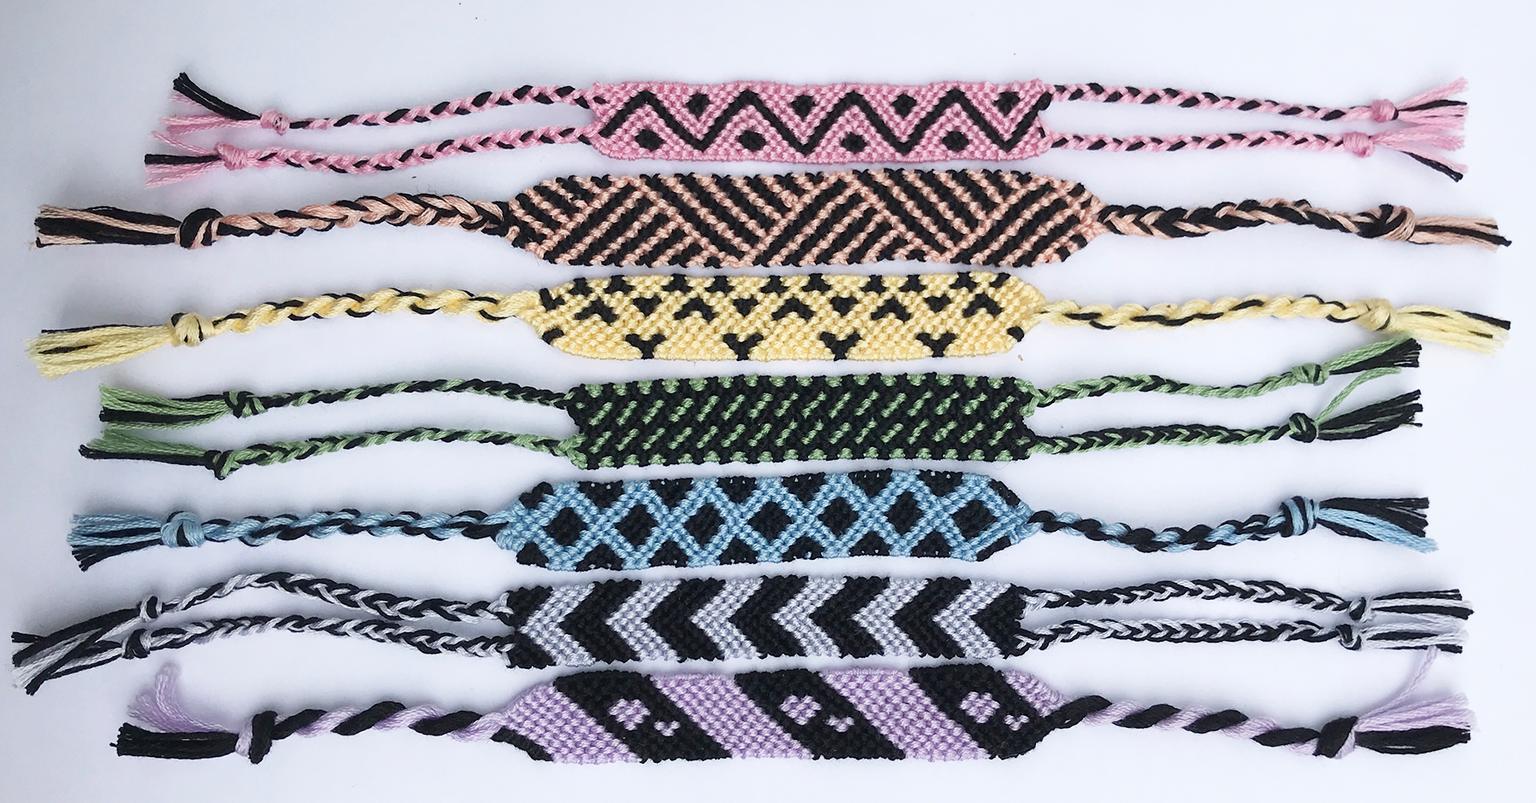 Image for entry 'One-color Frieze Patterns in Friendship Bracelets'